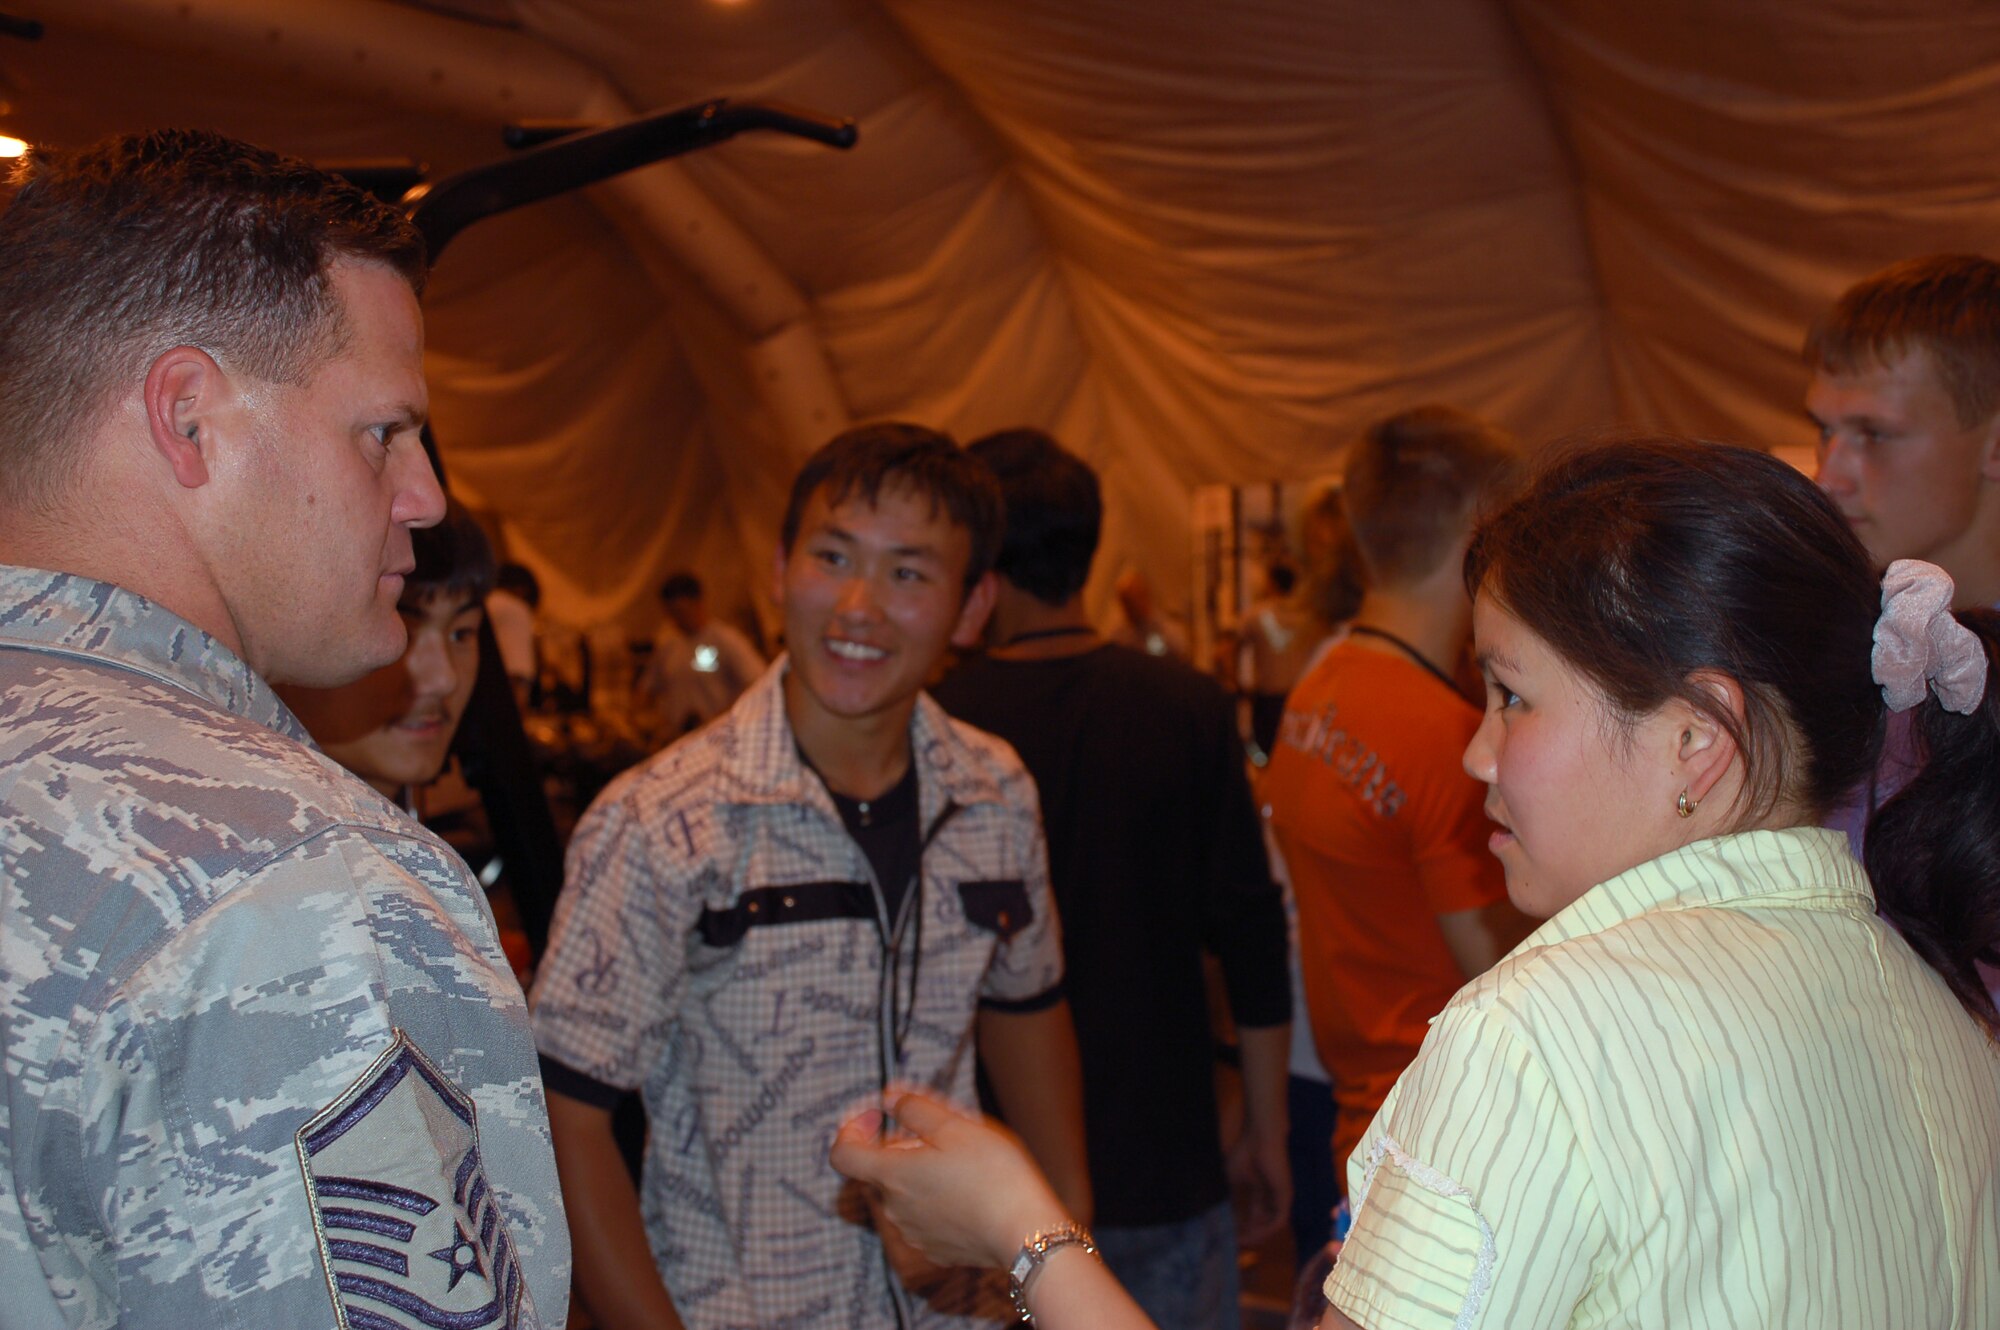 (08/05/15)  Master Sgt. Ernest Ridings, 376th Expeditionary Force Support Squadron fitness center superintendent, talks with students from the local Jany Pahkta Village.  The students, ranging from 16 to 17 years of age, visited the recreation and welfare facilities run by the 376th EFSS. (U.S. Air Force/ Lt. Col. Adriane Craig)